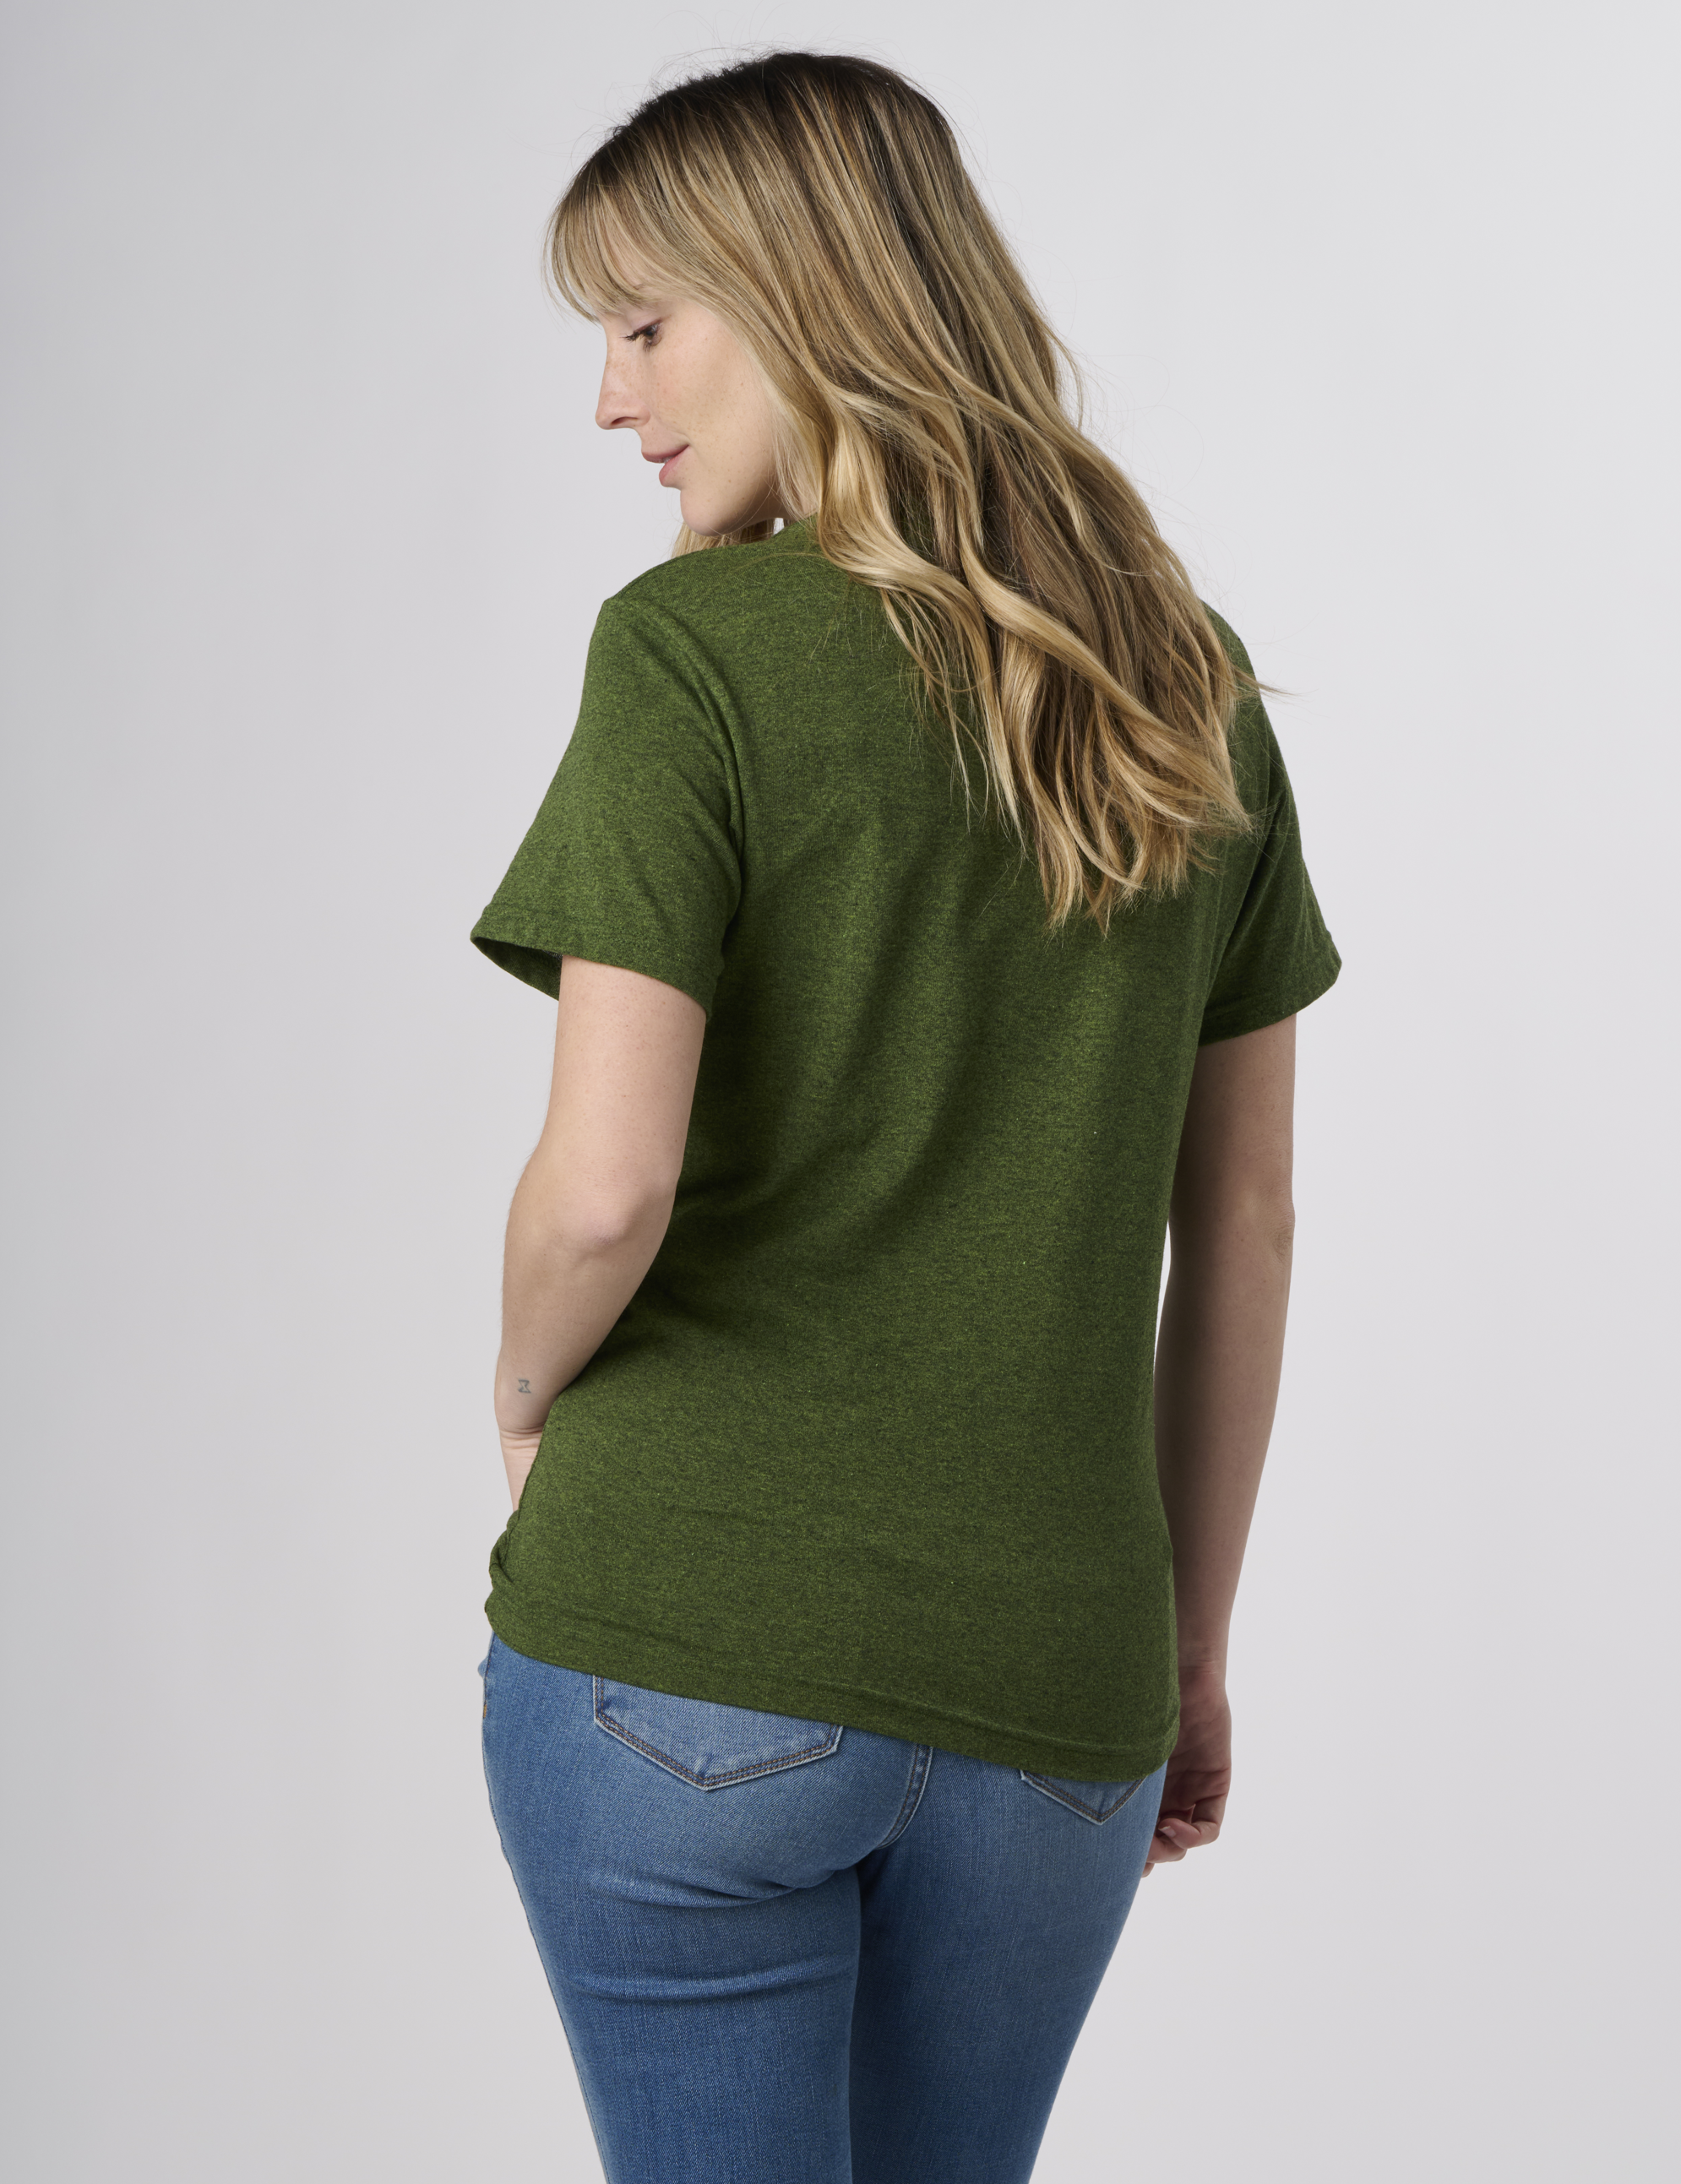 RECOVER_RS100_CLASSICSHORTSLEEVETSHIRT_GRASSGREEN_BACK_W_36749820-c880-4794-a524-ee6791c38499.png